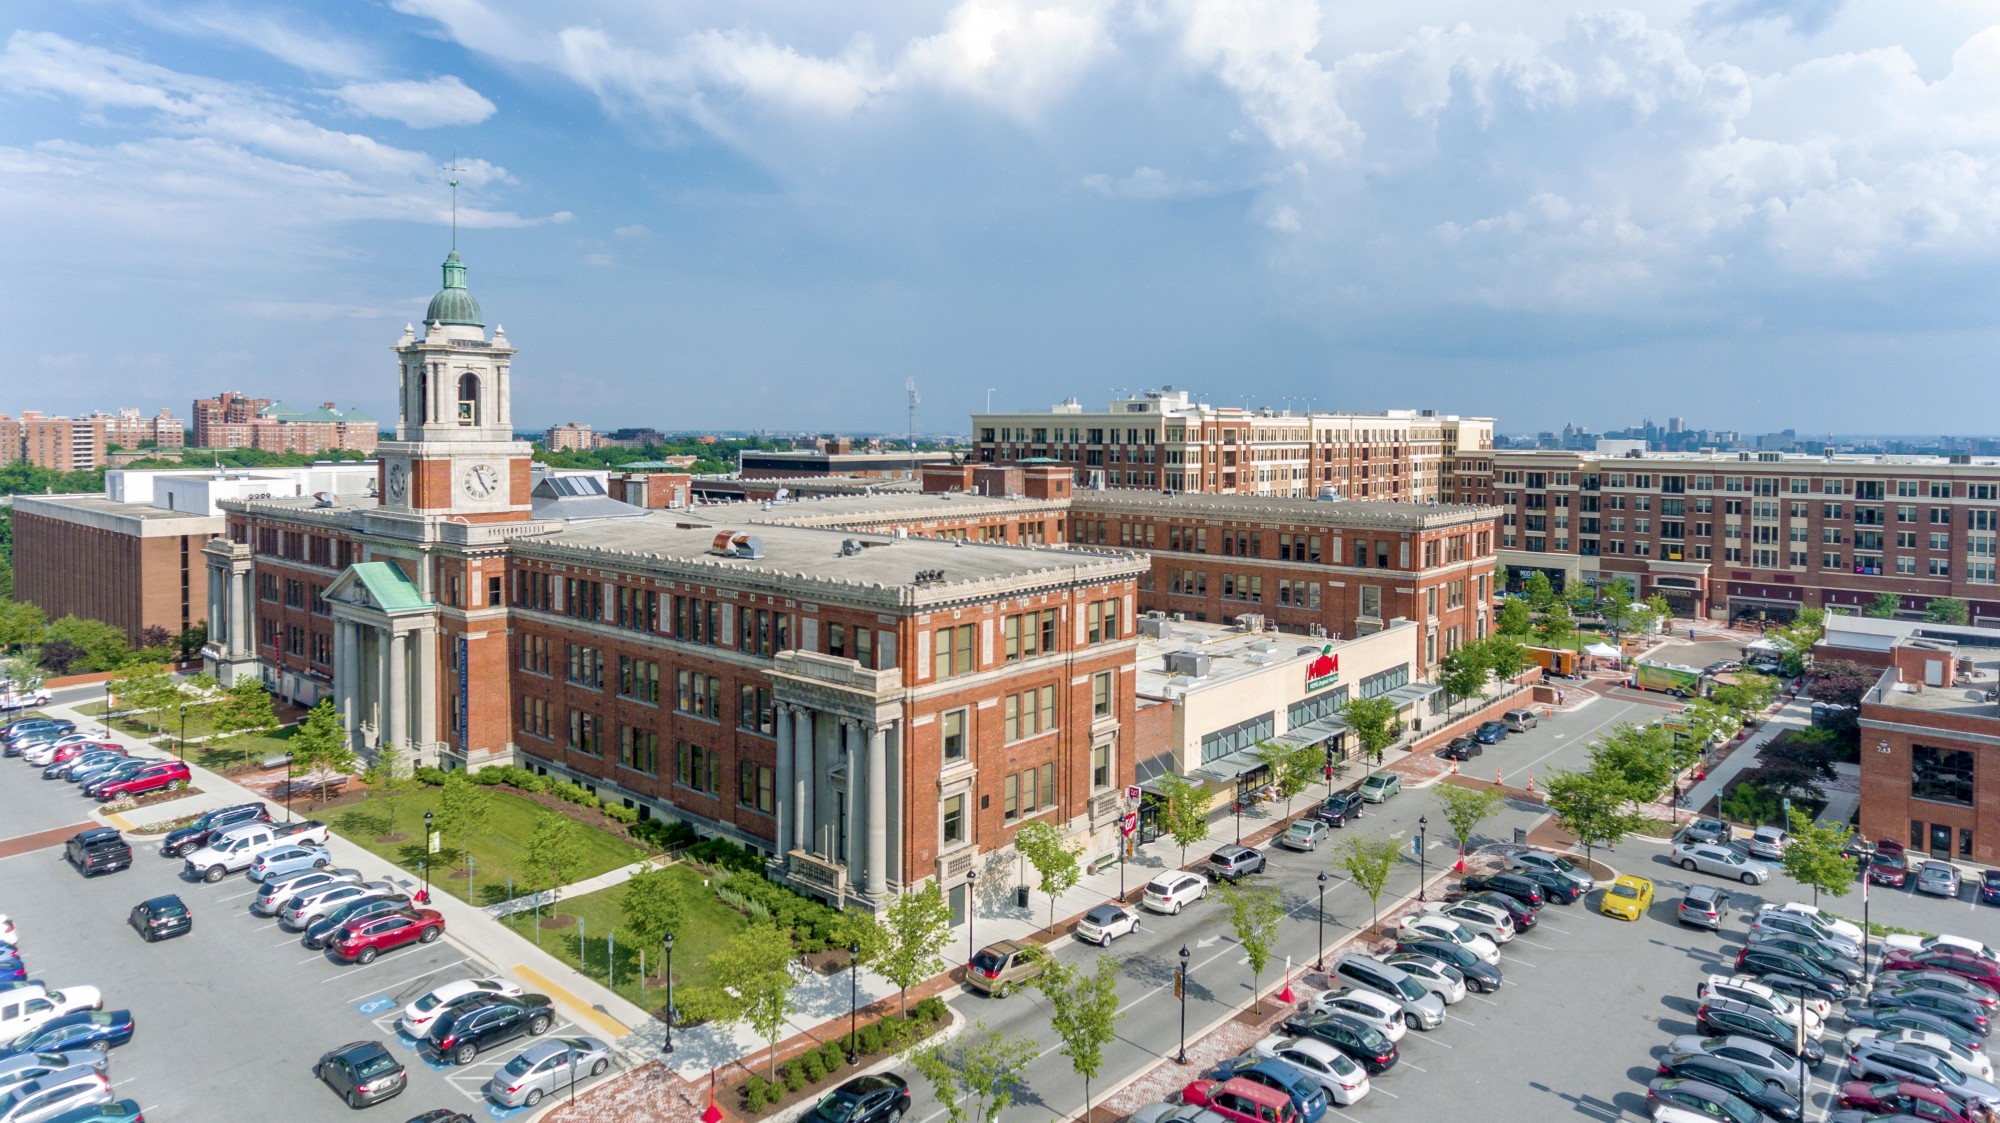 Aerial view of the Rotunda Building in Baltimore, MD